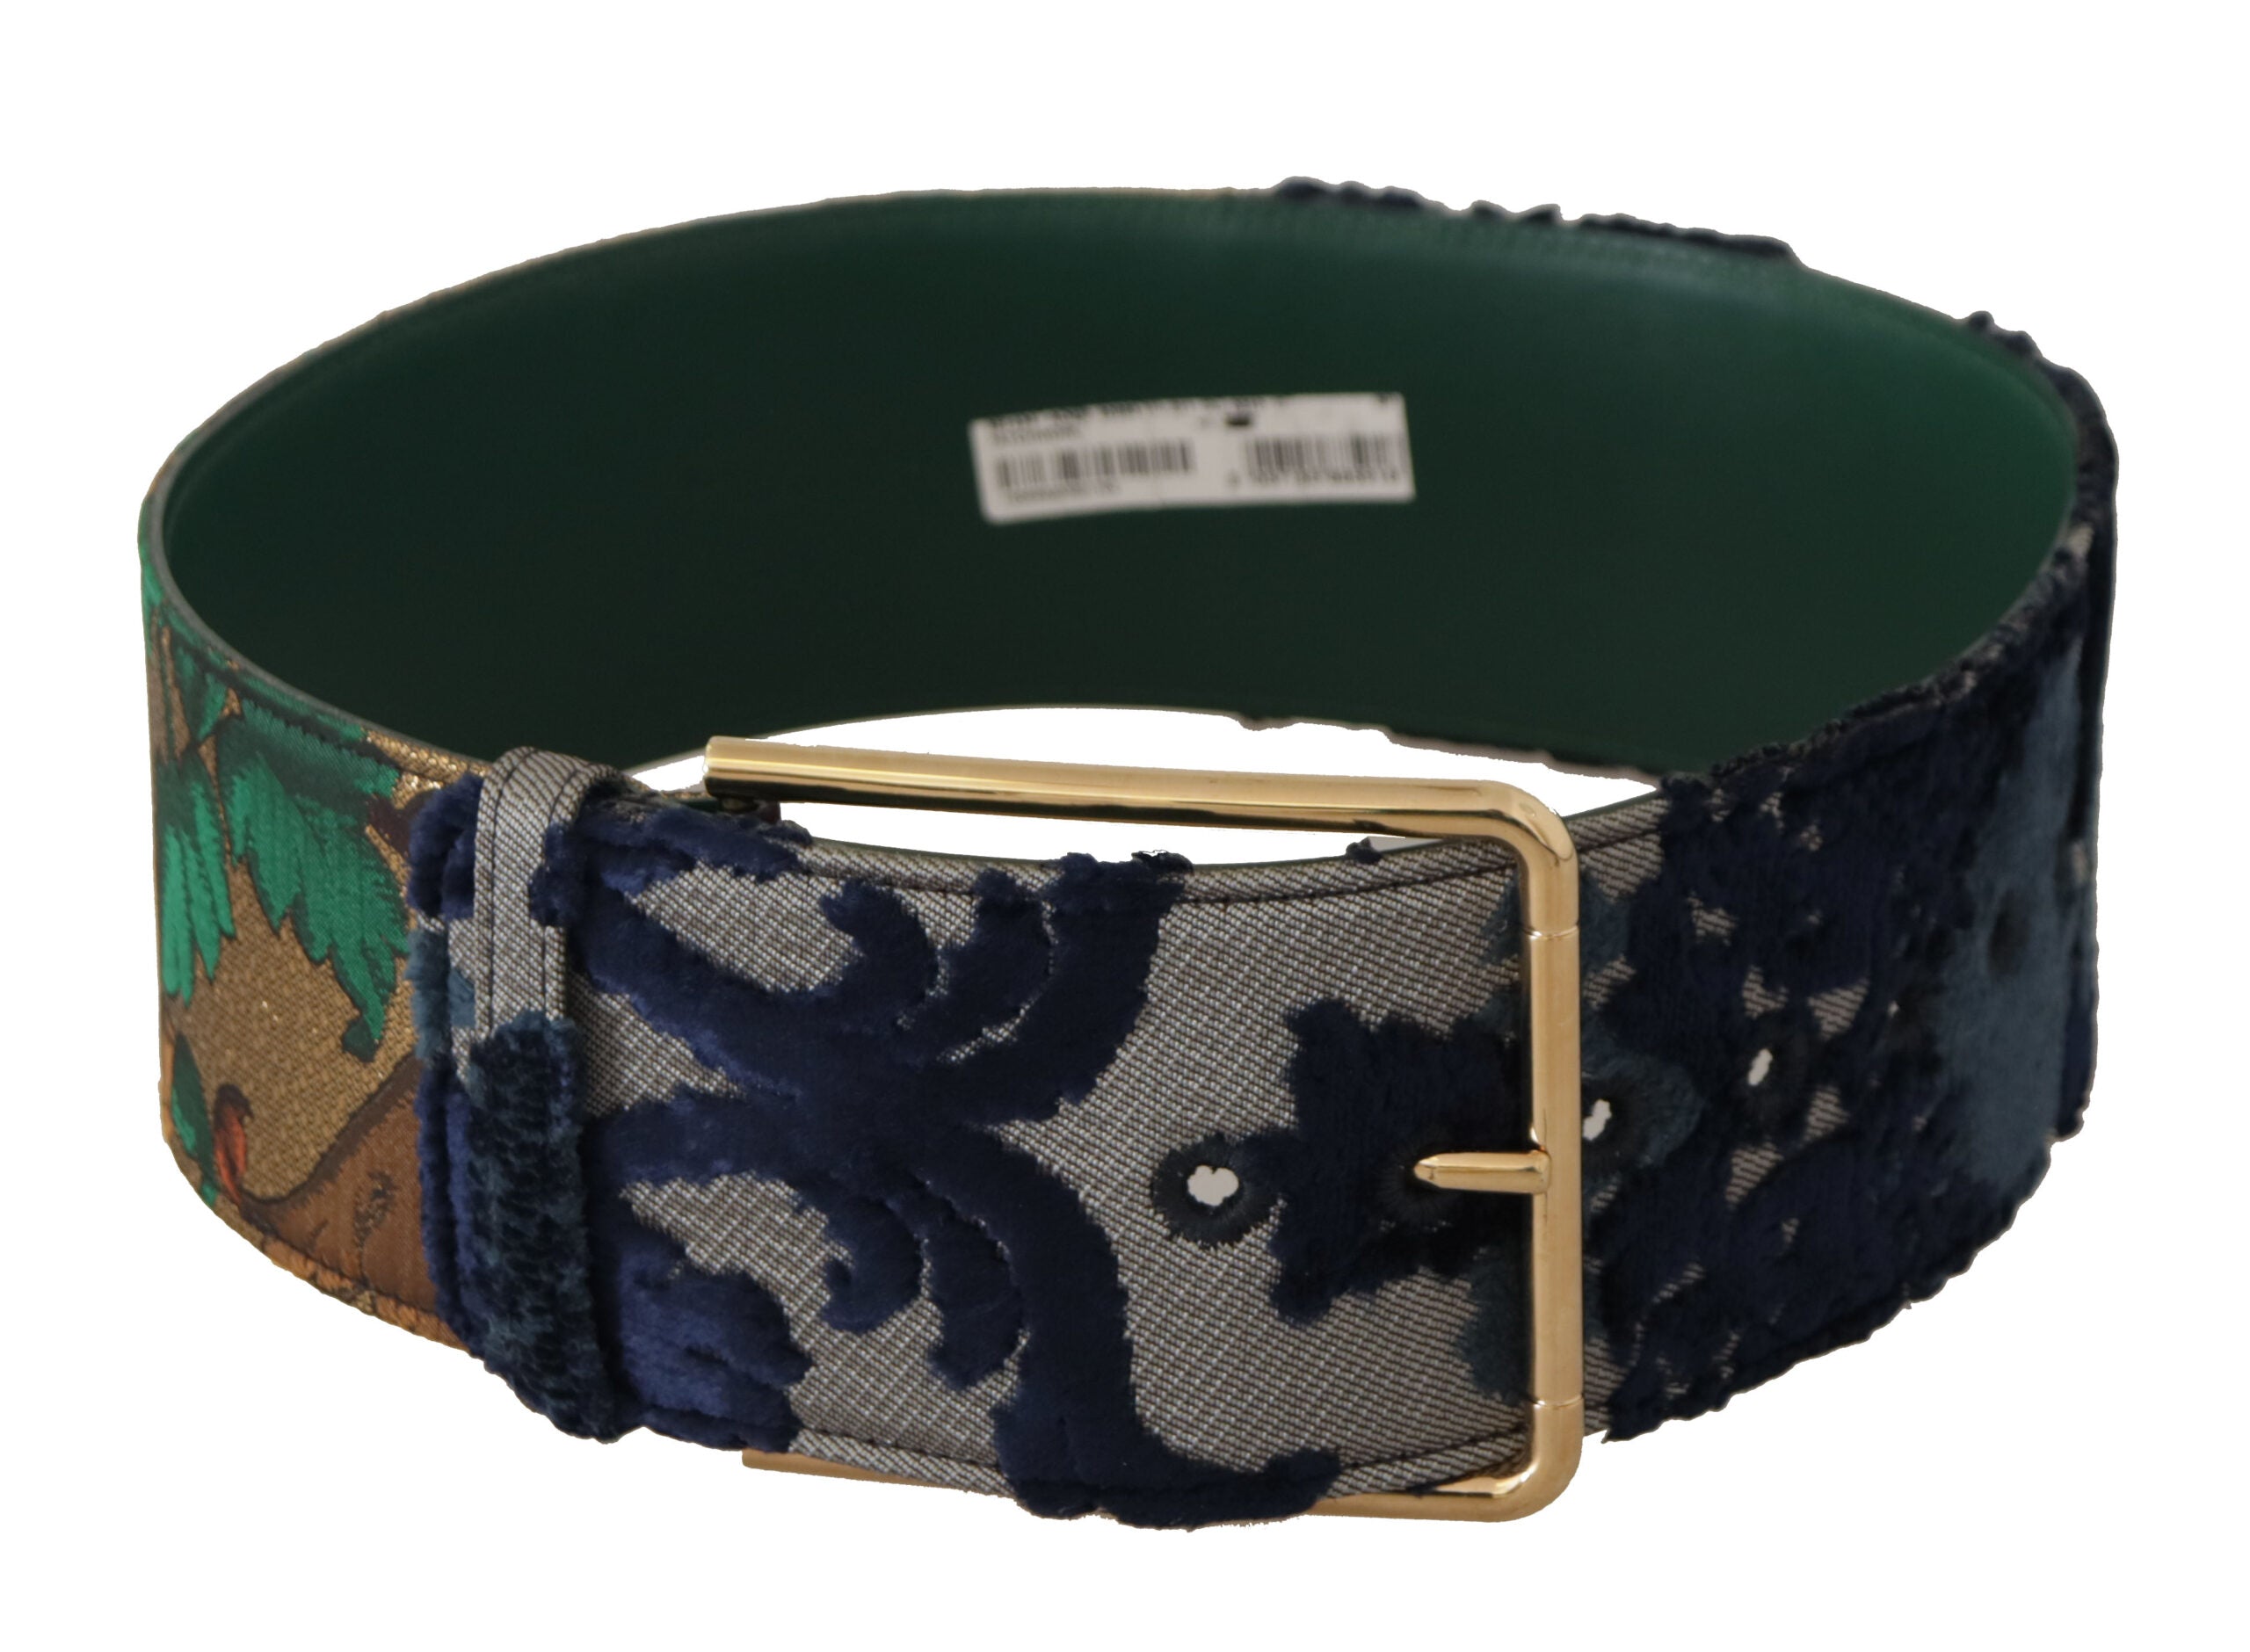 Green Jacquard Embroid Leather Gold Metal Buckle Belt